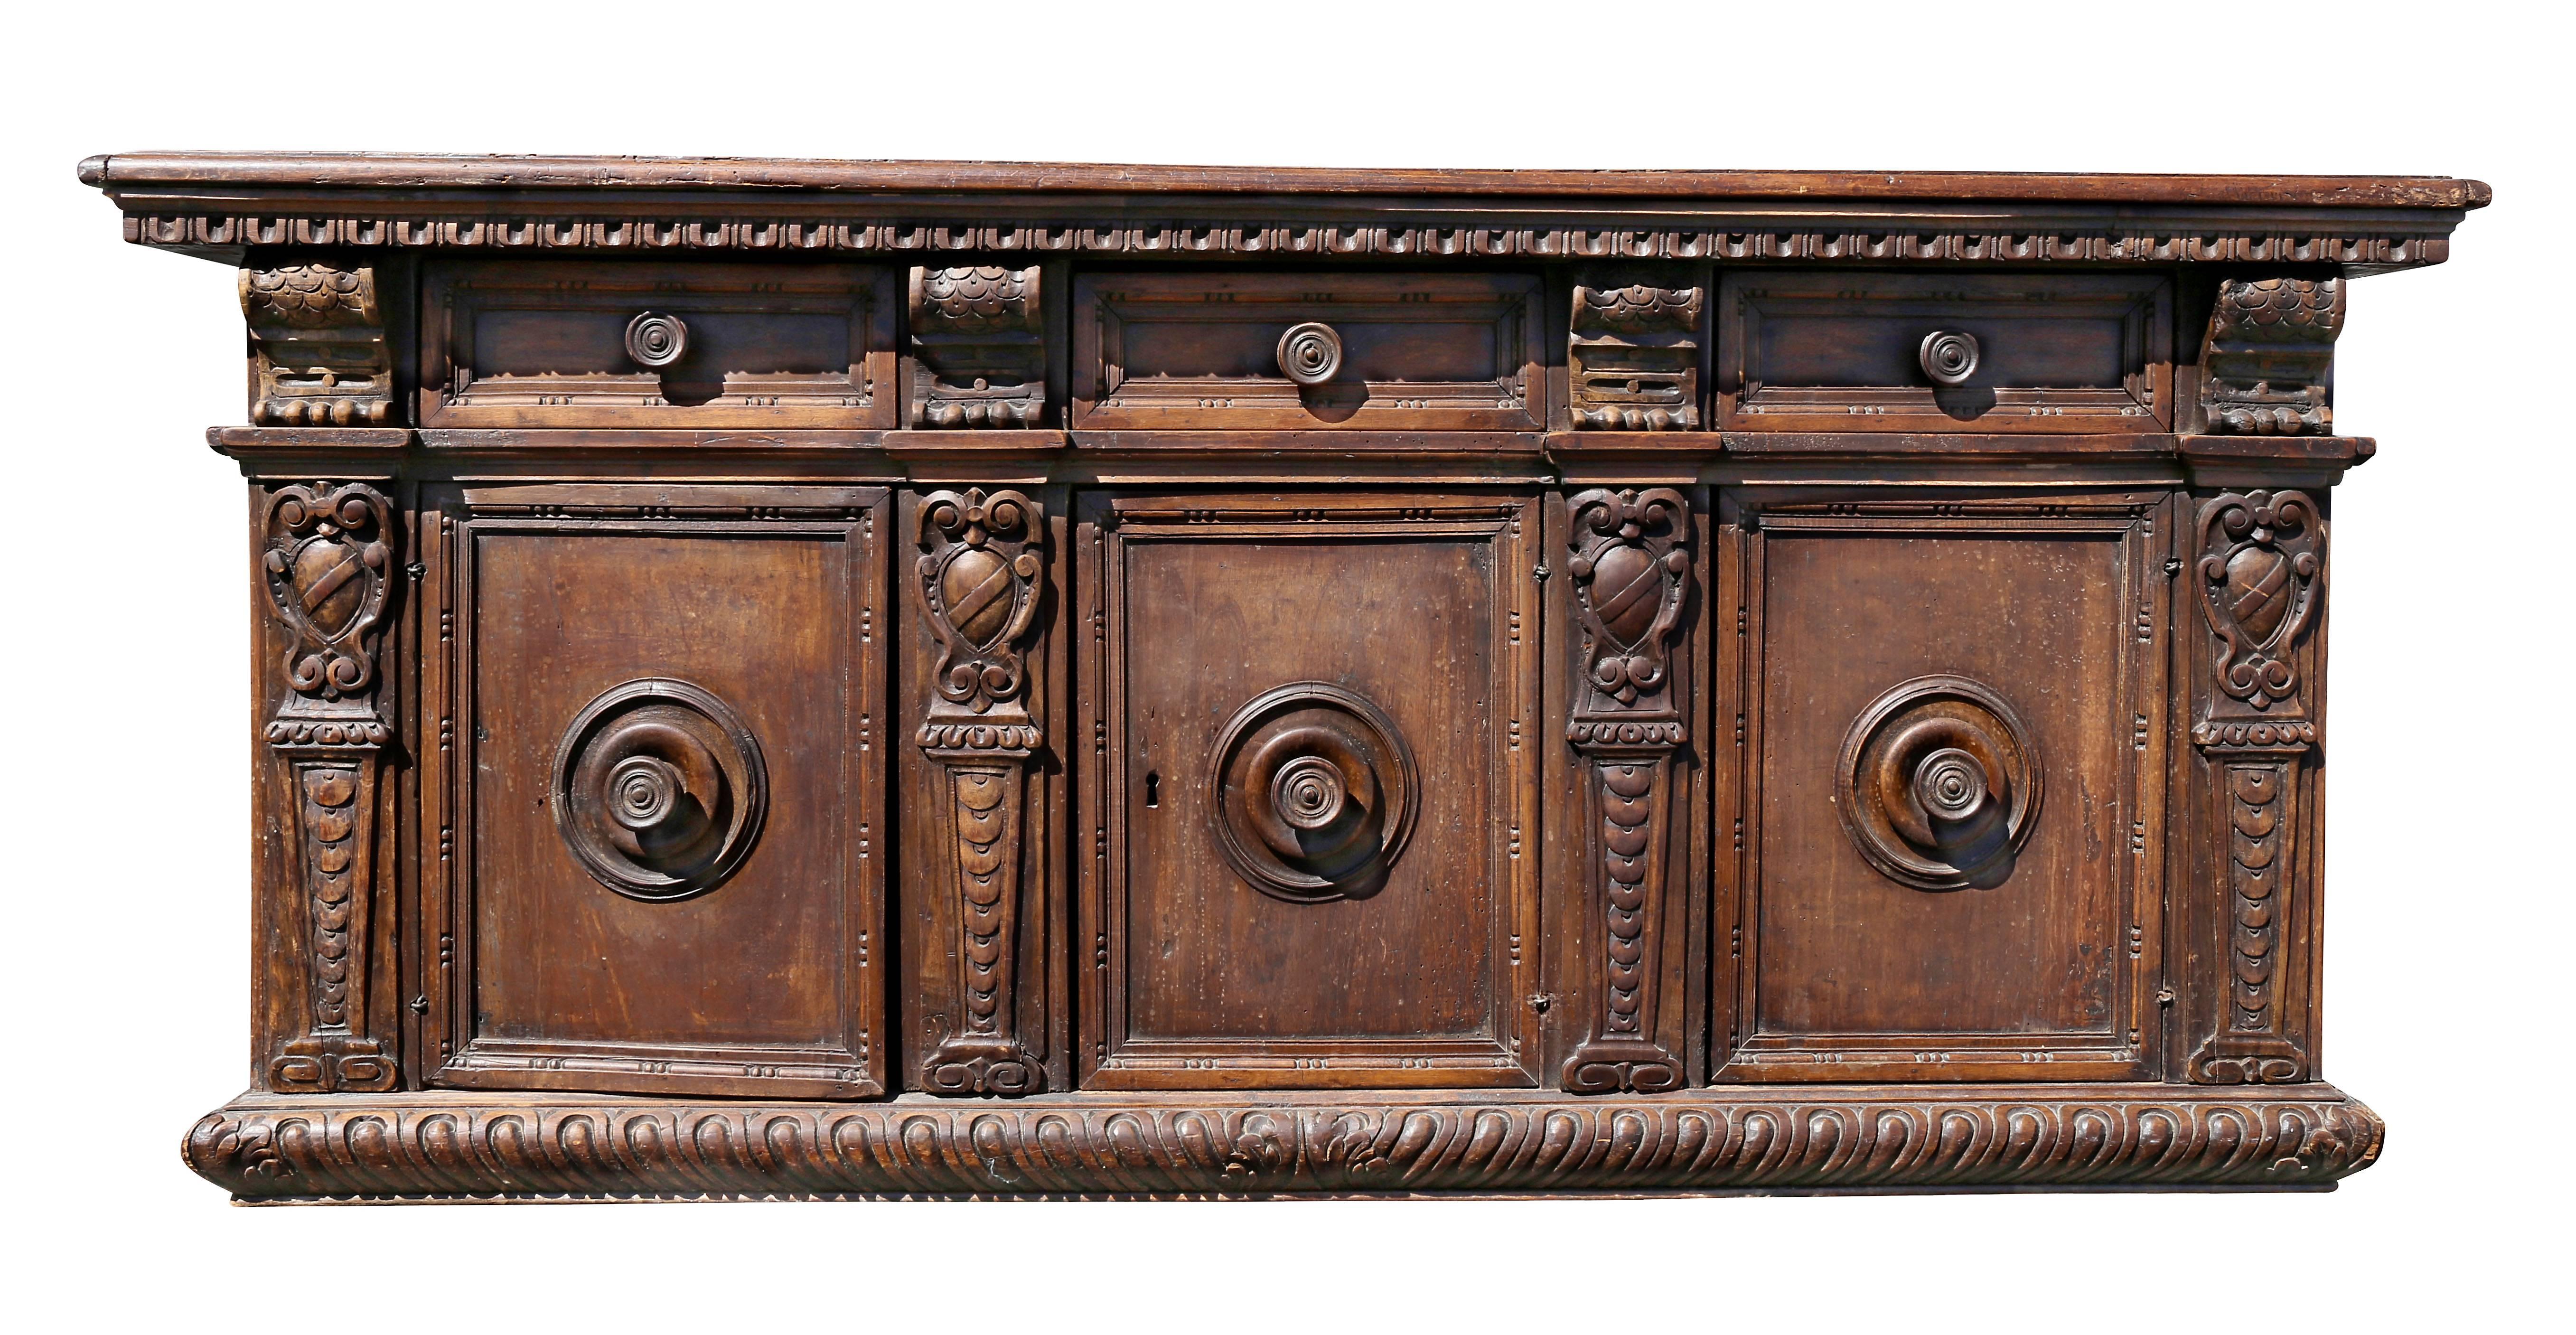 Rectangular top over three drawers flanked by corbels over three drawers flanked by cartouches on a gadrooned base. Lacking its original base.